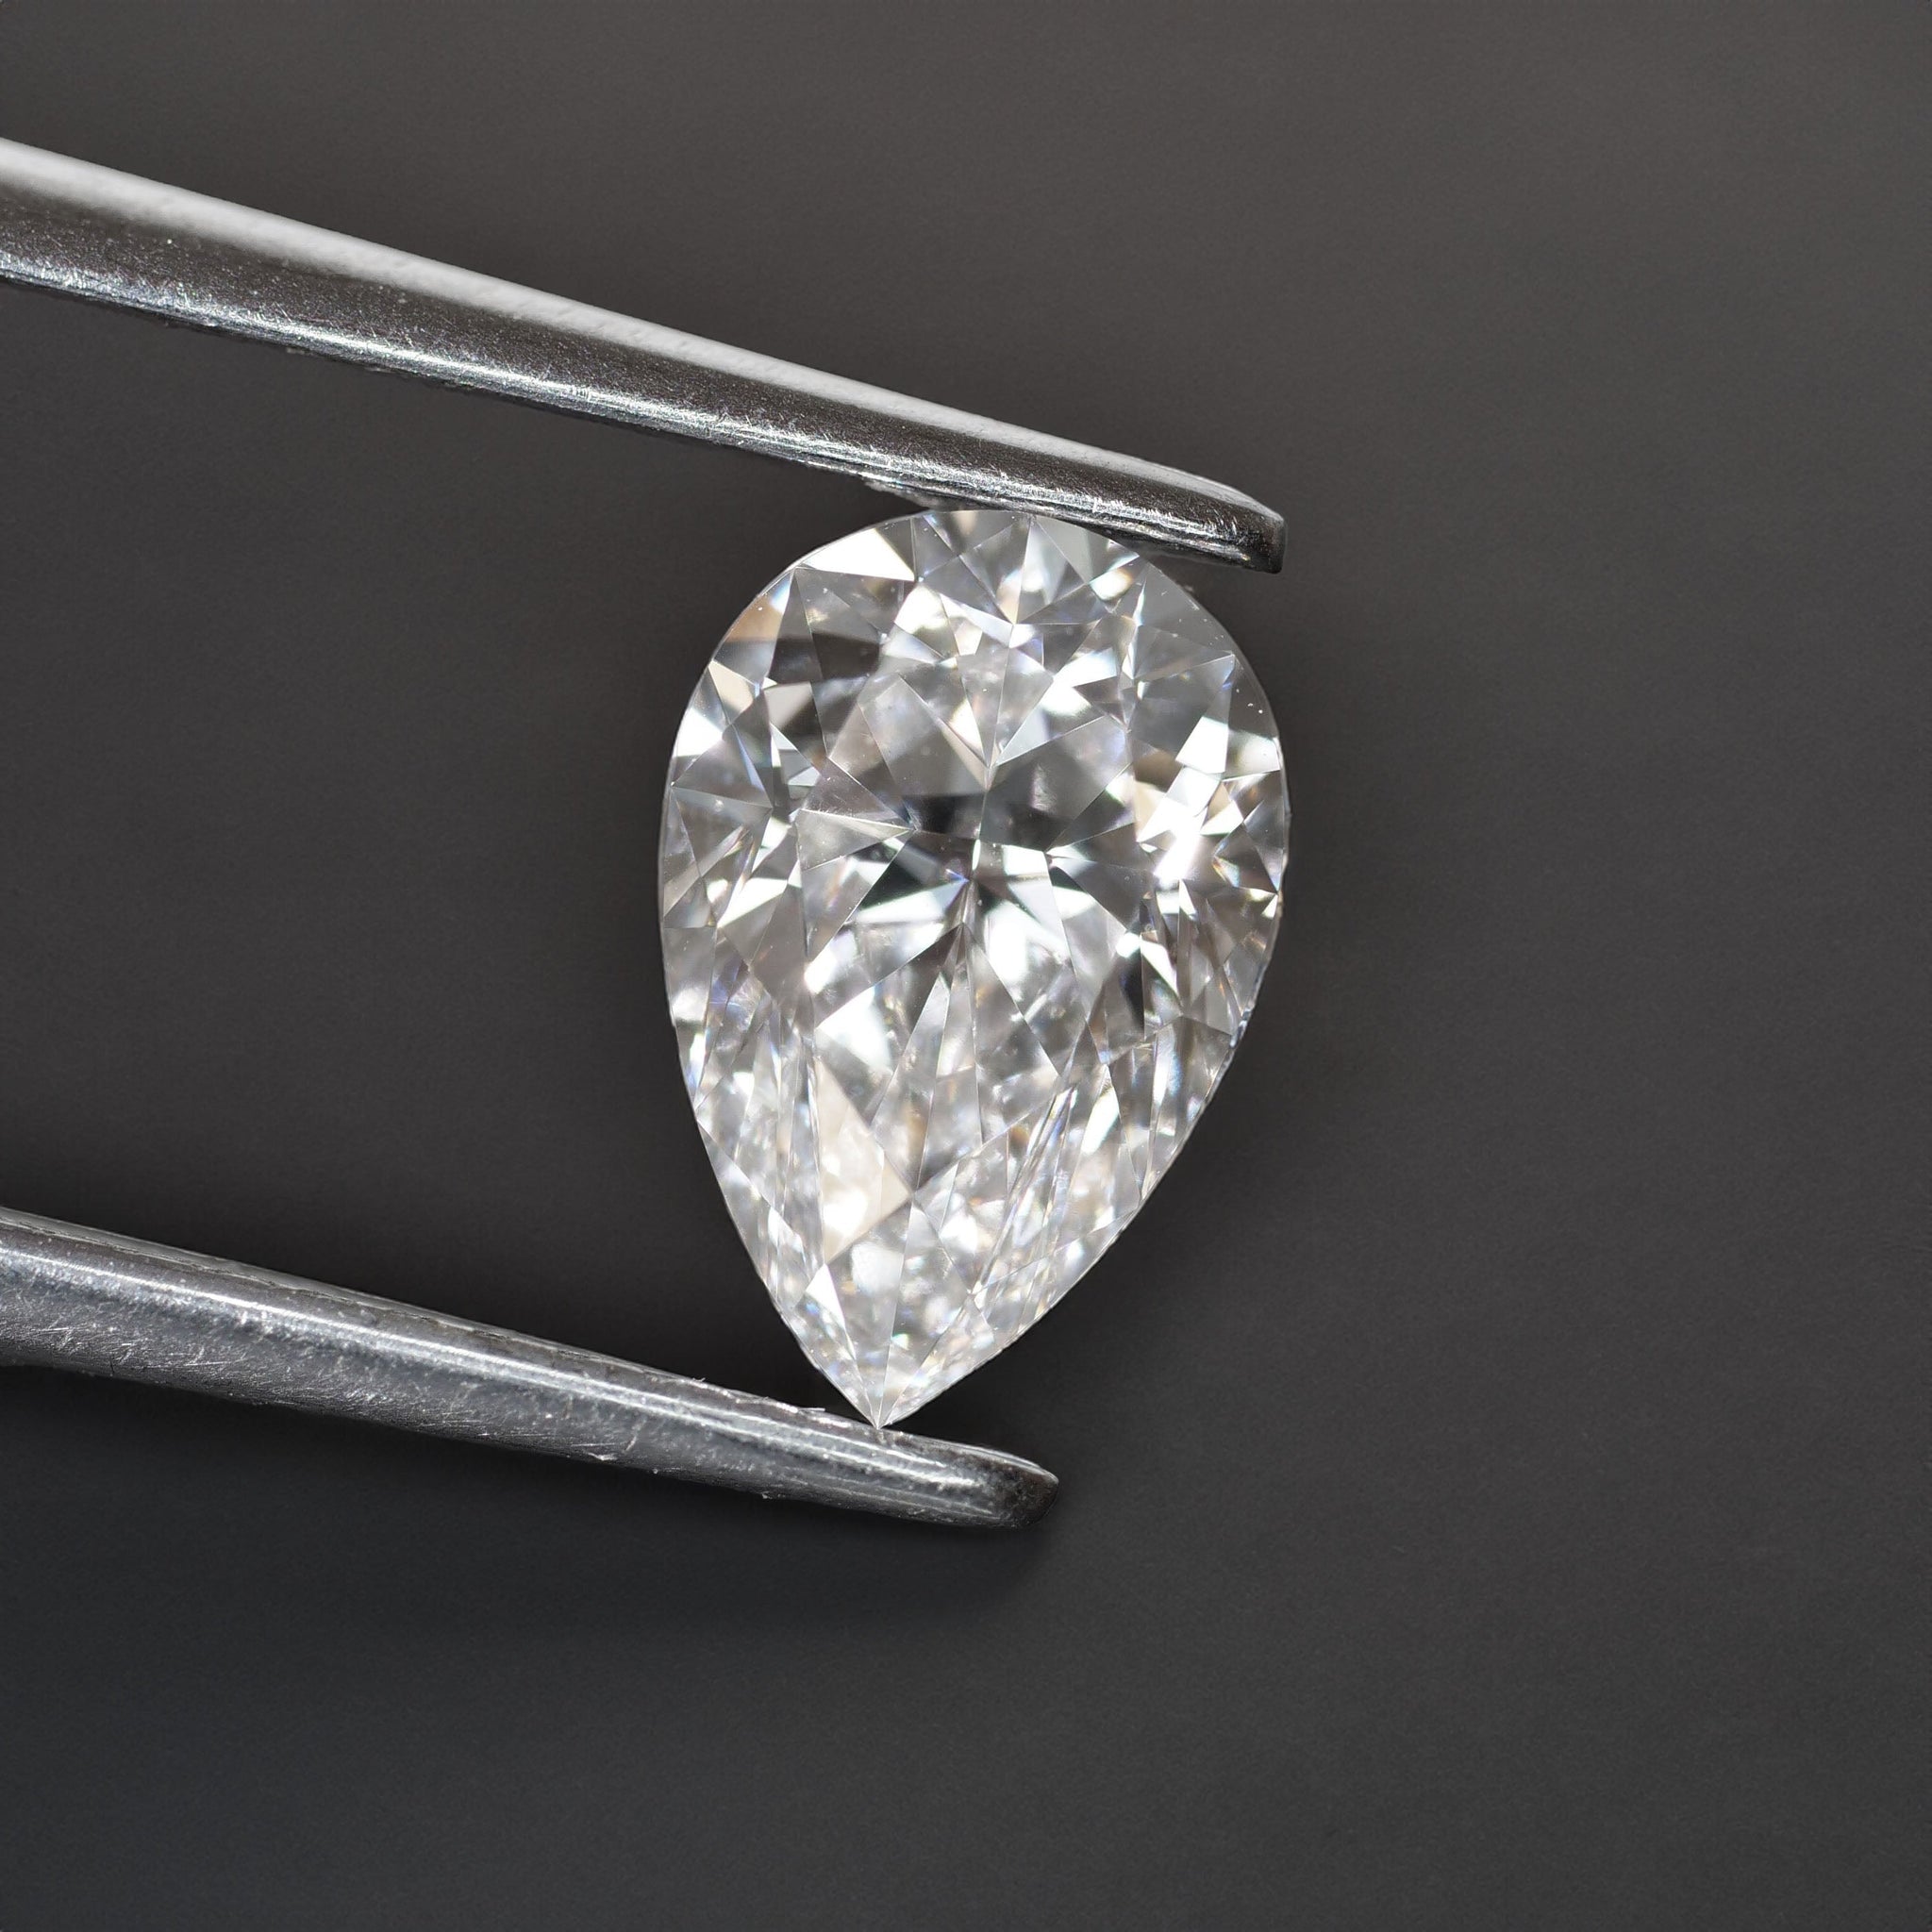 Natural diamond | GIA certified, pear cut 7x4,5 mm, G color, VS, 0.53ct - Eden Garden Jewelry™